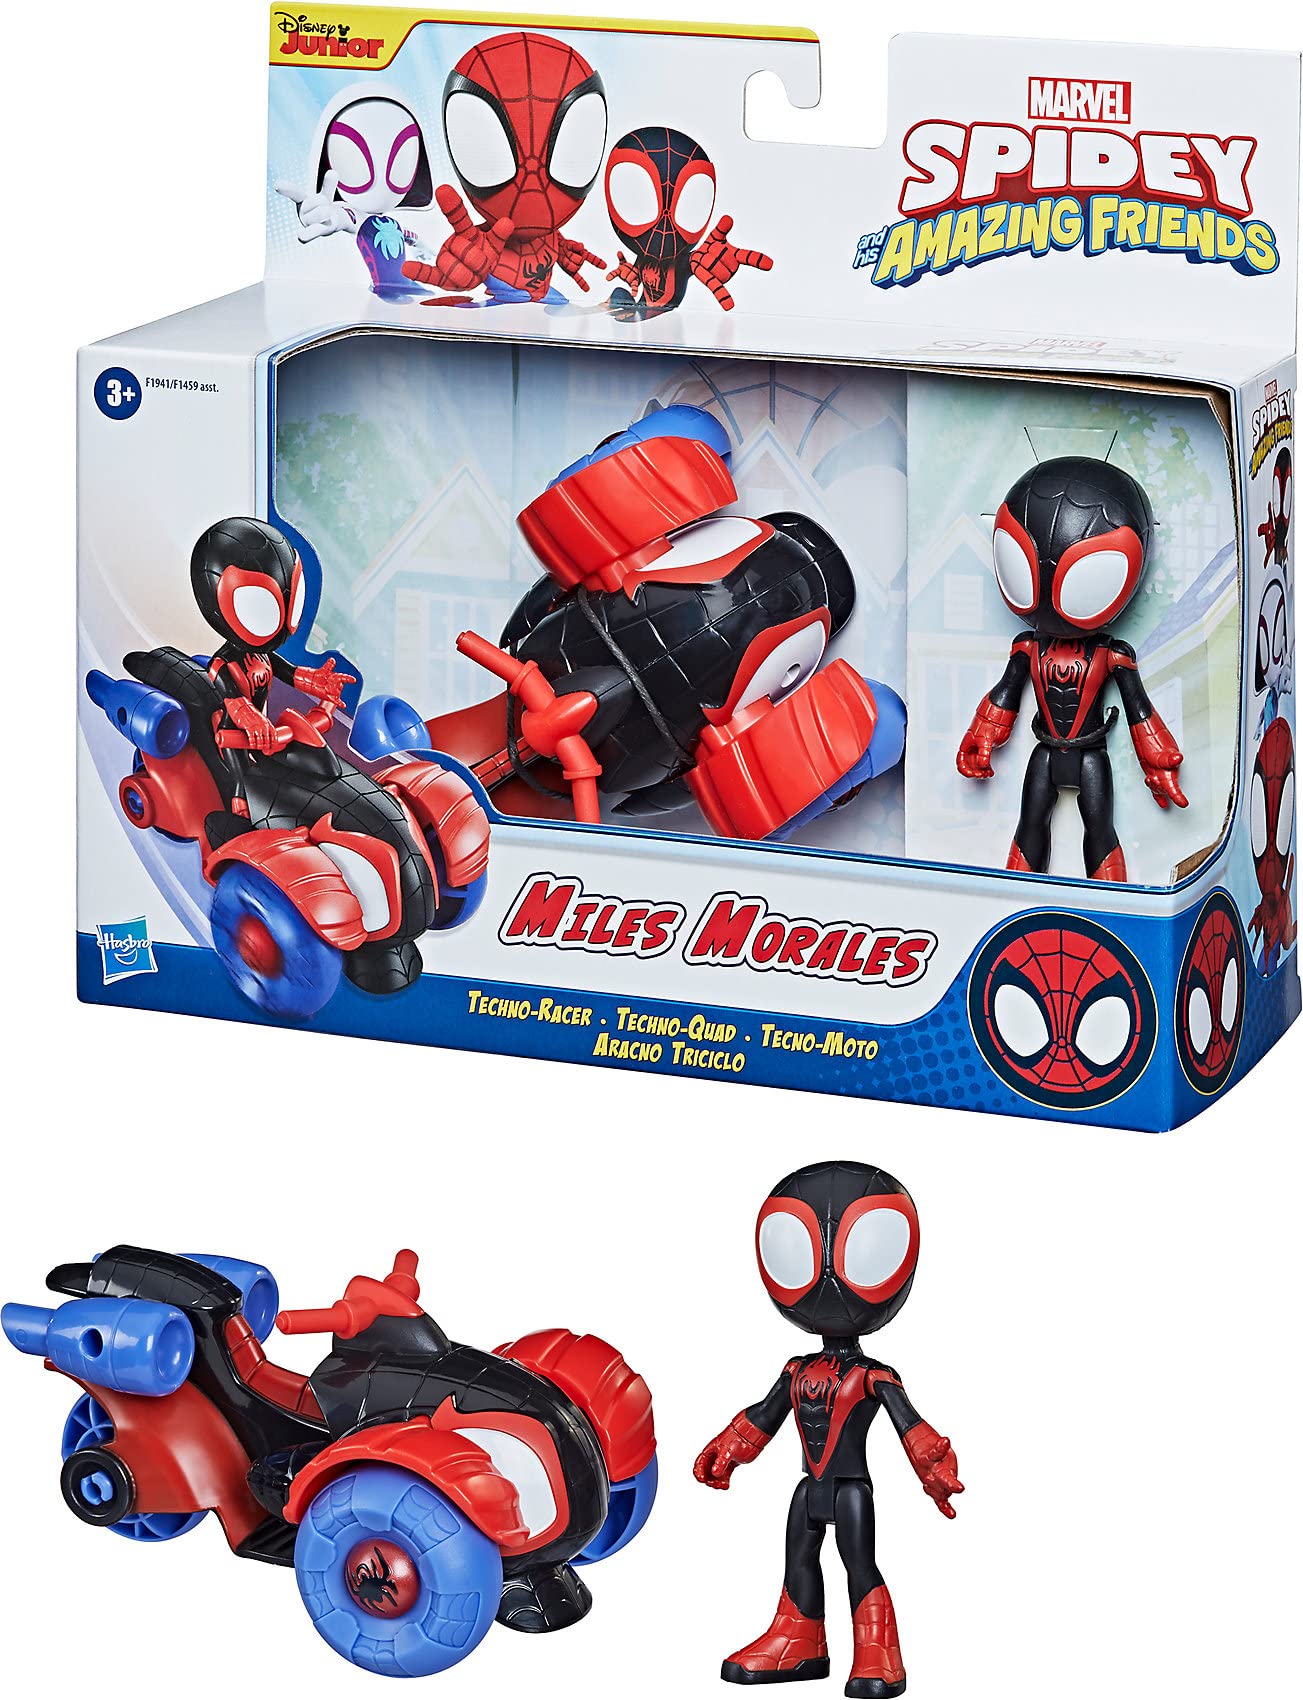 Spidey and His Amazing Friends Marvel Miles Morales Action Figure and Techno-Racer Vehicle, for Kids Ages 3 and Up (F1941)